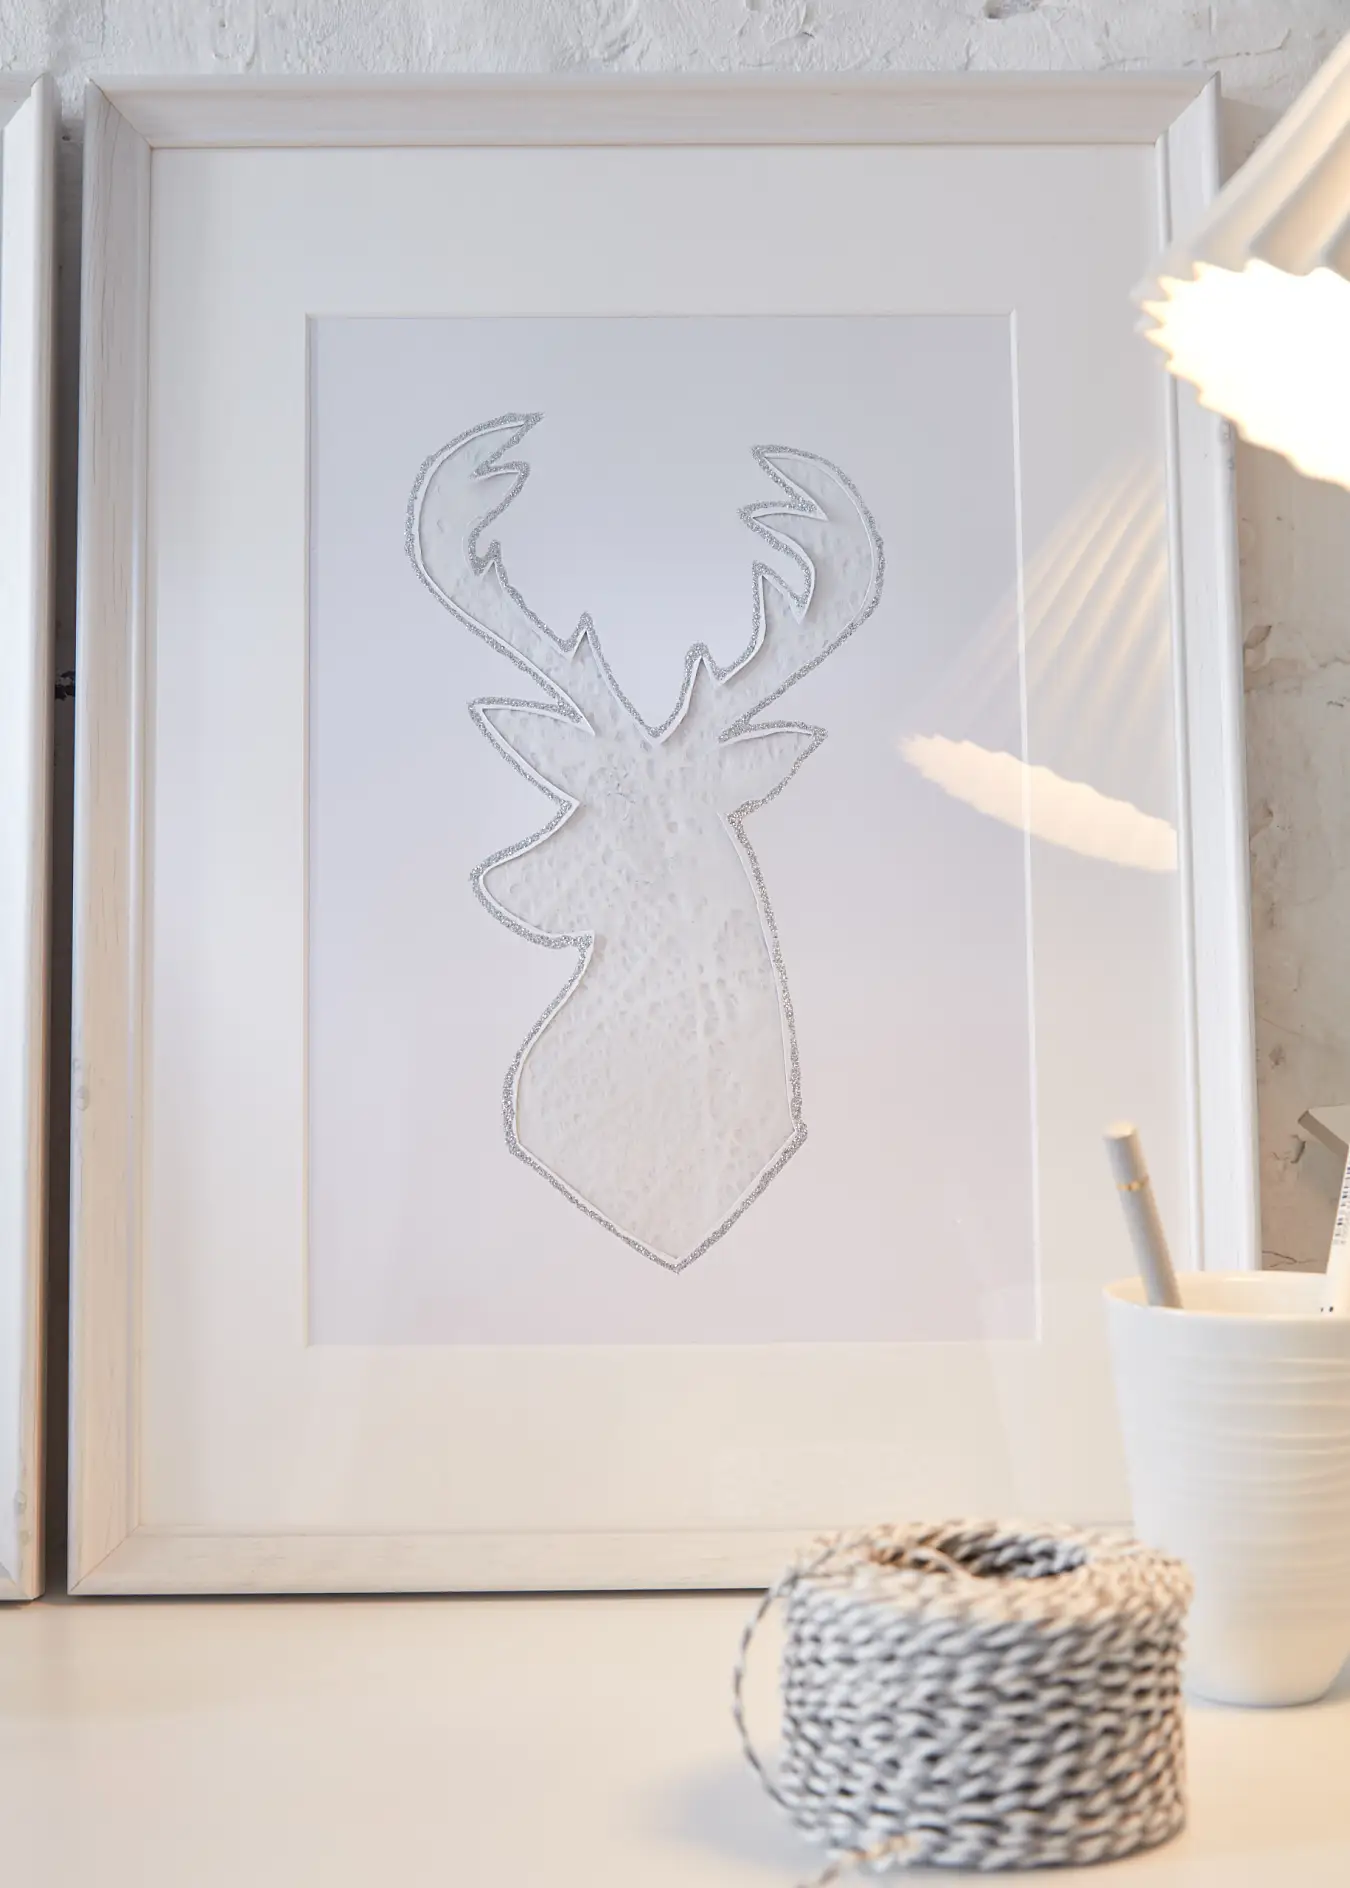 Decorate your sideboard with these self-made glitter reindeer pictures!